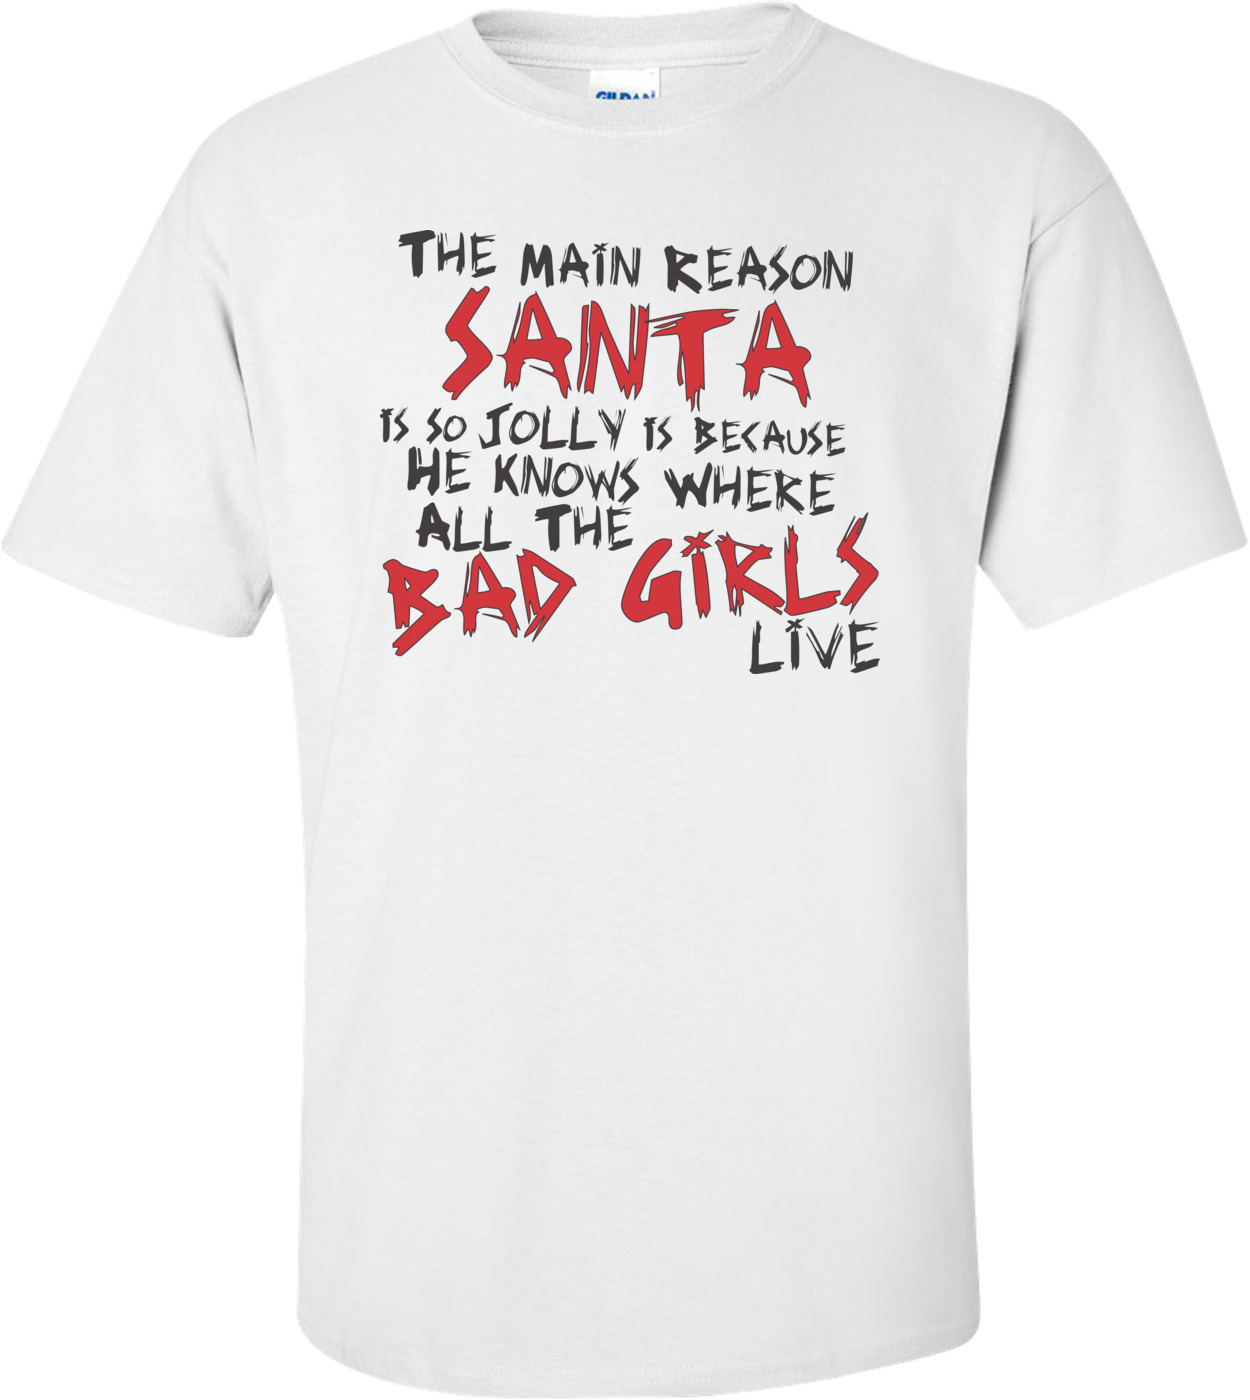 Womens Santa Is Jolly Because He Knows Where The Bad Girls Live Tshirt Funny